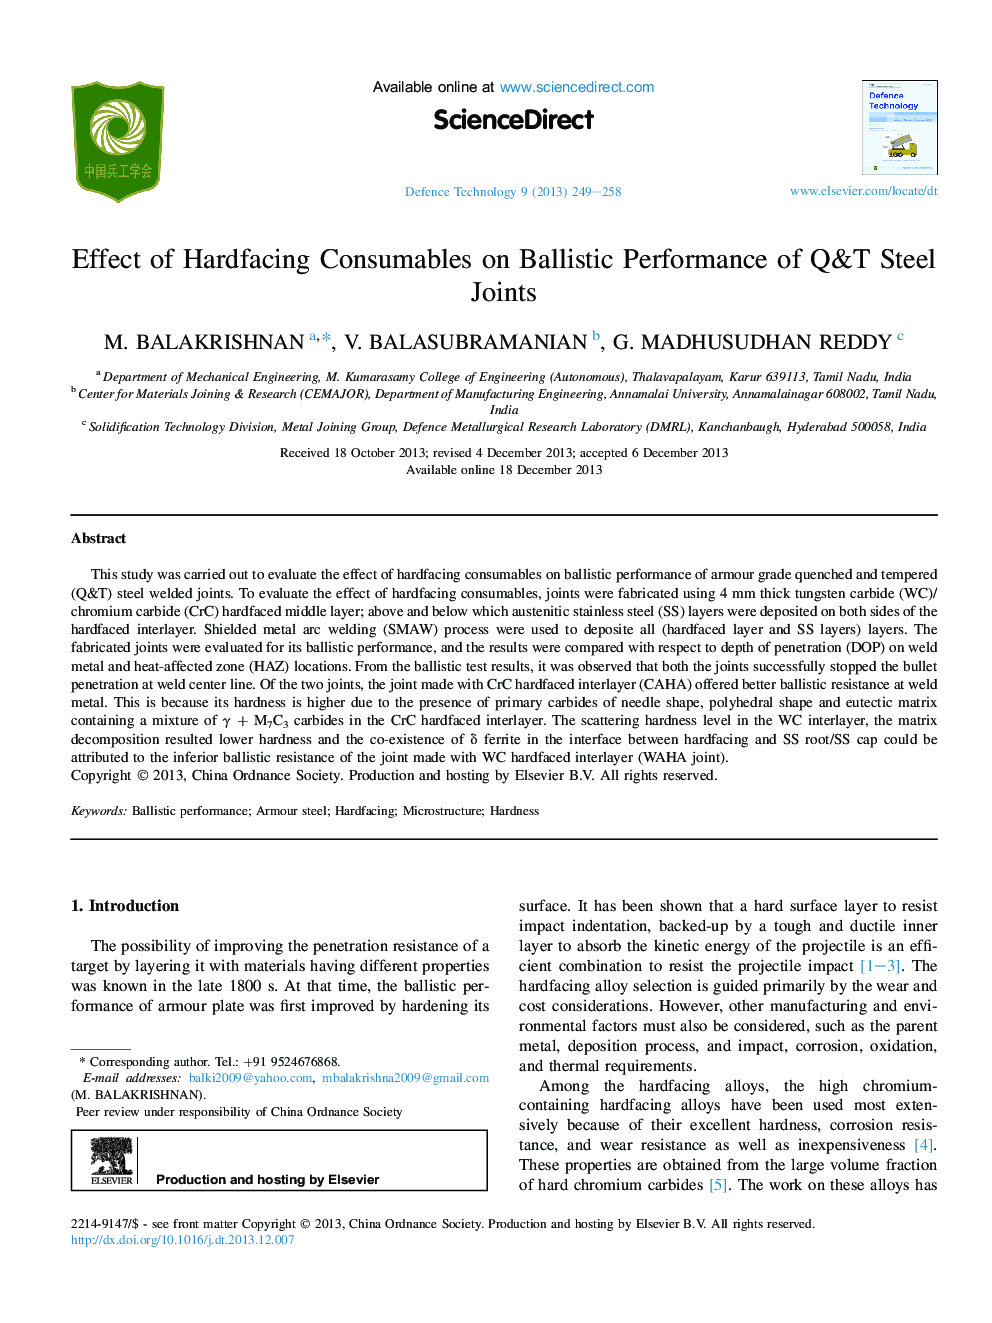 Effect of Hardfacing Consumables on Ballistic Performance of Q&T Steel Joints 